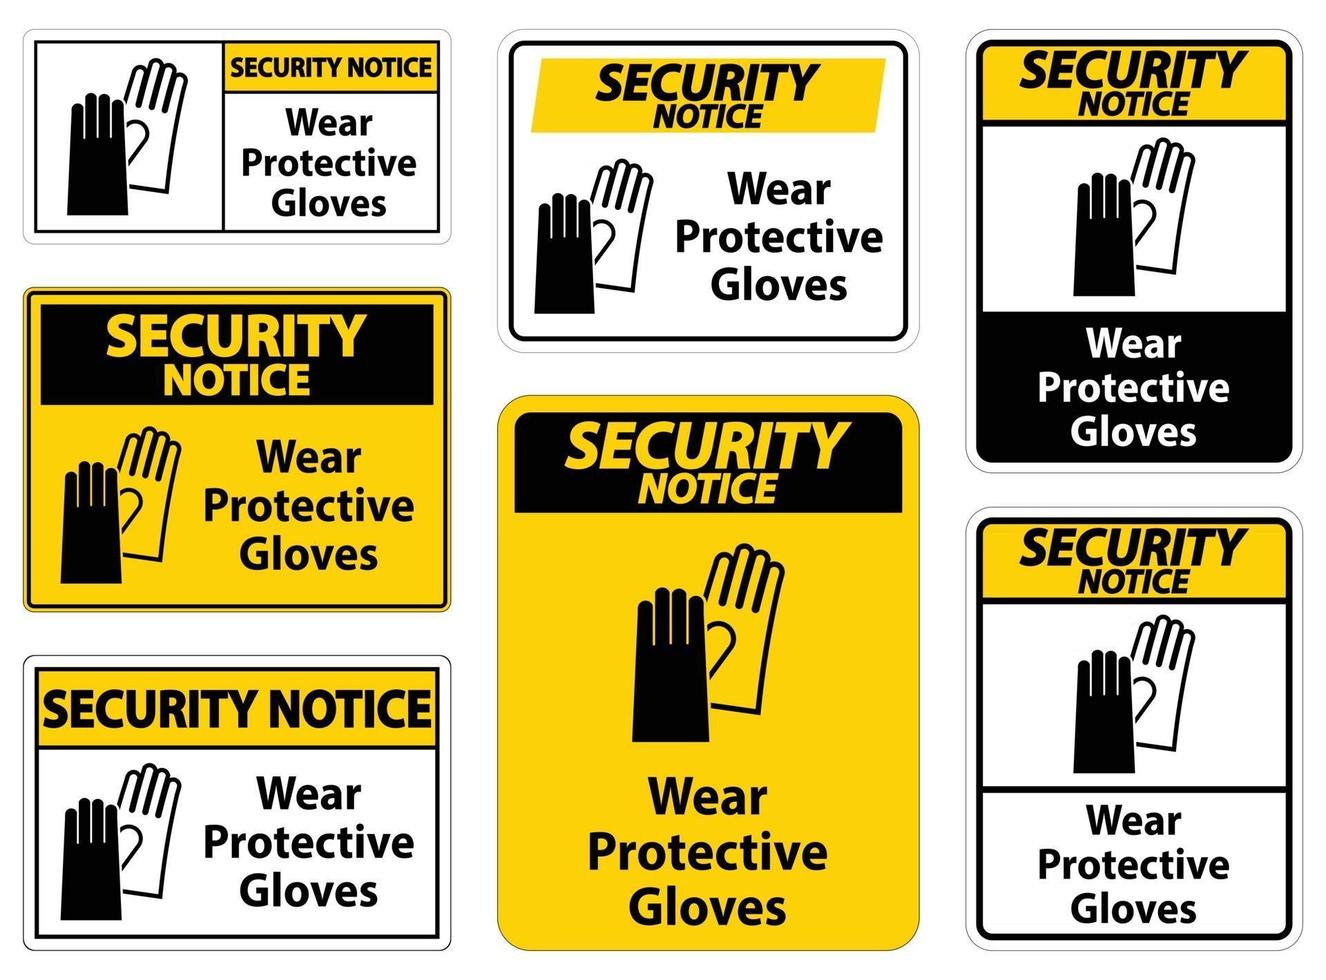 Security Notice Wear protective gloves sign on white background vector